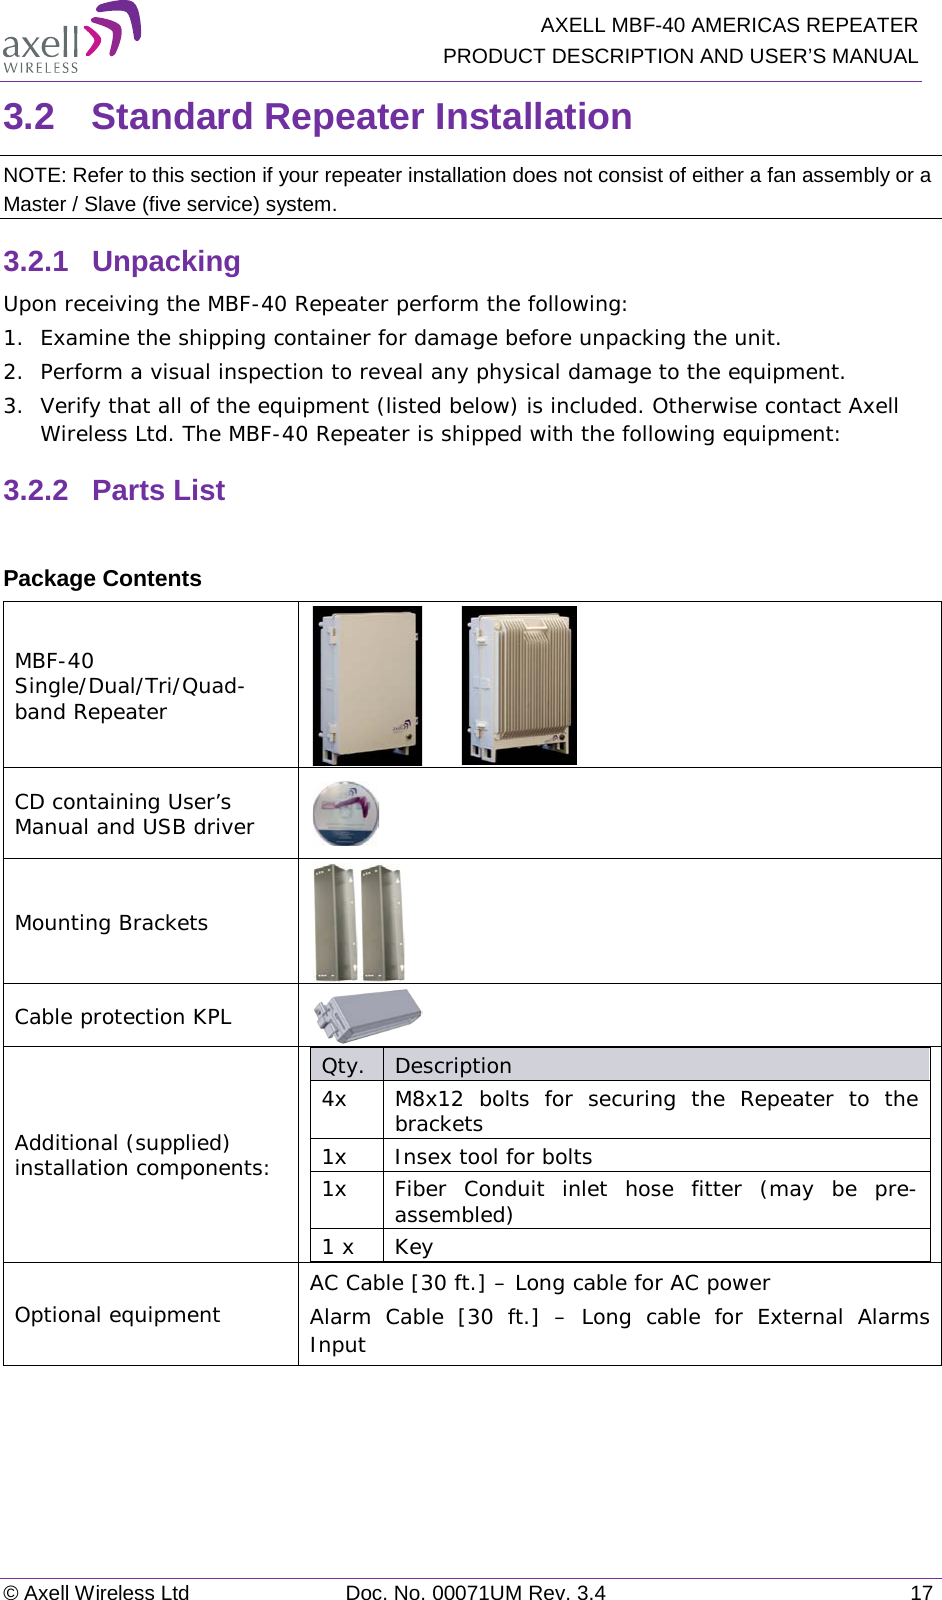   AXELL MBF-40 AMERICAS REPEATER PRODUCT DESCRIPTION AND USER’S MANUAL © Axell Wireless Ltd Doc. No. 00071UM Rev. 3.4 17 3.2  Standard Repeater Installation NOTE: Refer to this section if your repeater installation does not consist of either a fan assembly or a Master / Slave (five service) system. 3.2.1  Unpacking Upon receiving the MBF-40 Repeater perform the following: 1.  Examine the shipping container for damage before unpacking the unit. 2.  Perform a visual inspection to reveal any physical damage to the equipment.  3.  Verify that all of the equipment (listed below) is included. Otherwise contact Axell Wireless Ltd. The MBF-40 Repeater is shipped with the following equipment: 3.2.2  Parts List  Package Contents MBF-40 Single/Dual/Tri/Quad-band Repeater        CD containing User’s Manual and USB driver  Mounting Brackets  Cable protection KPL  Additional (supplied) installation components:  Qty.  Description  4x M8x12 bolts for securing the Repeater to the brackets 1x Insex tool for bolts 1x Fiber Conduit inlet hose fitter (may be pre-assembled) 1 x  Key Optional equipment AC Cable [30 ft.] – Long cable for AC power Alarm Cable [30 ft.] –  Long cable for External Alarms Input     